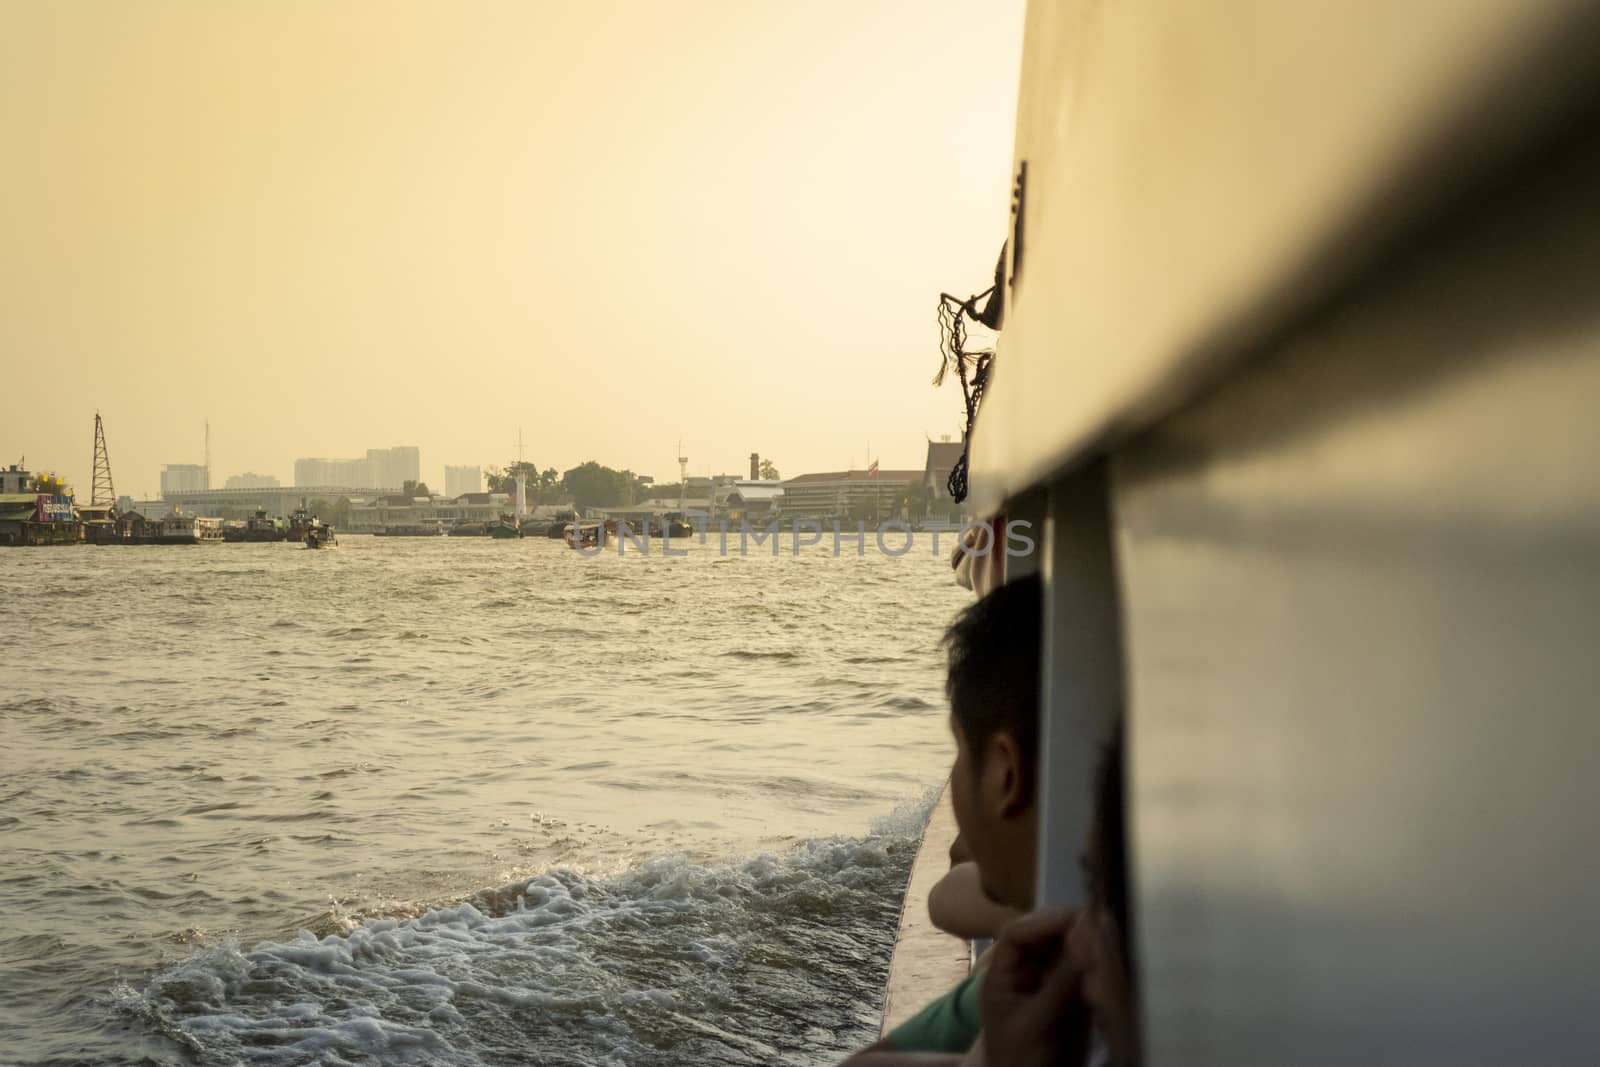 people enjoying a cruise with view on the Chao Phrya river in Bangkok, Thailand during sunset by kb79